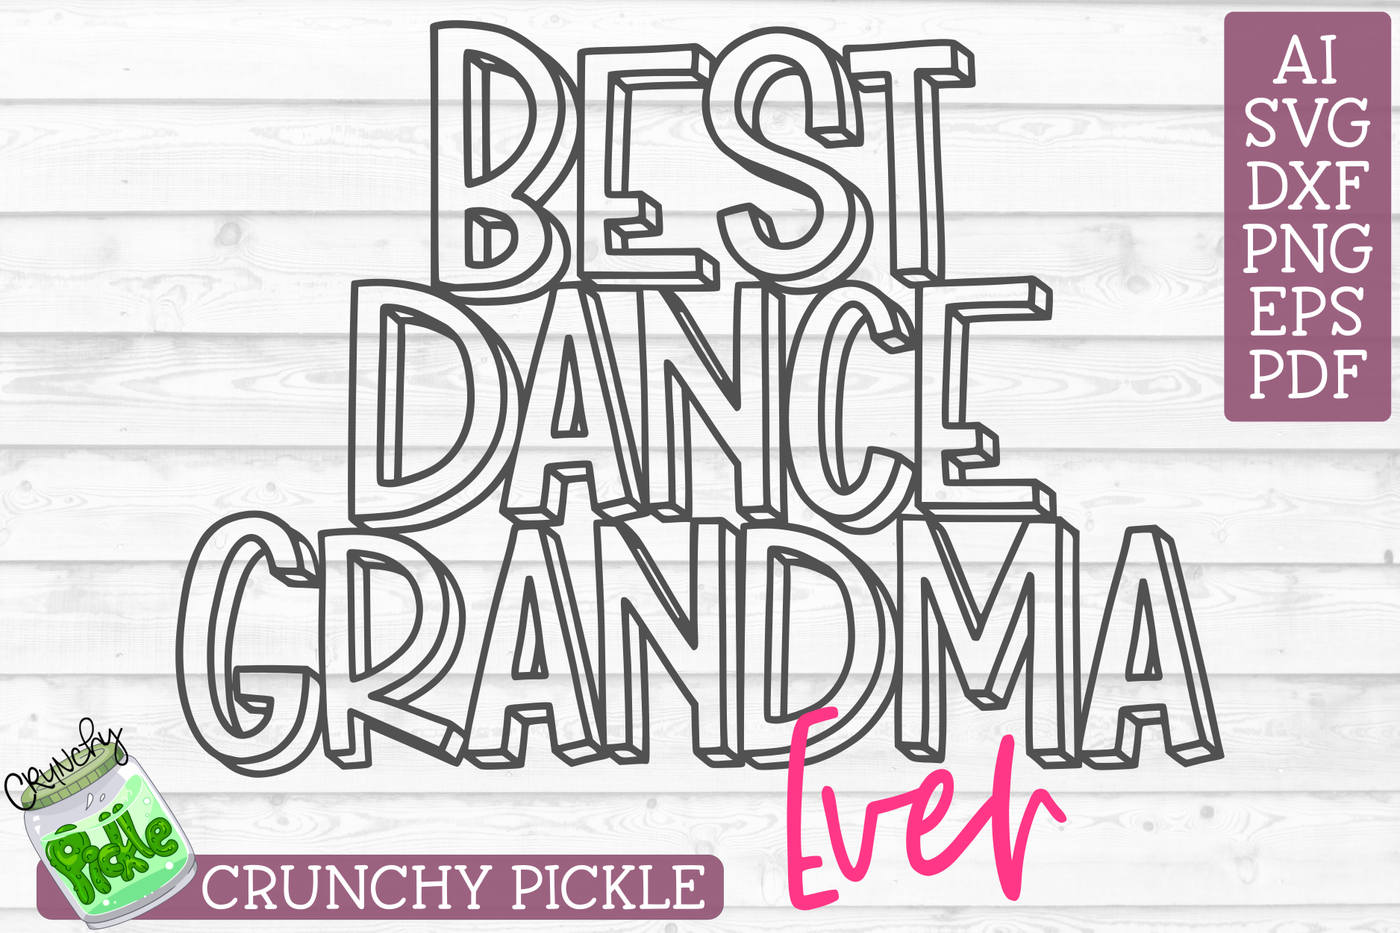 Download Best Dance Grandma Ever By Crunchy Pickle | TheHungryJPEG.com